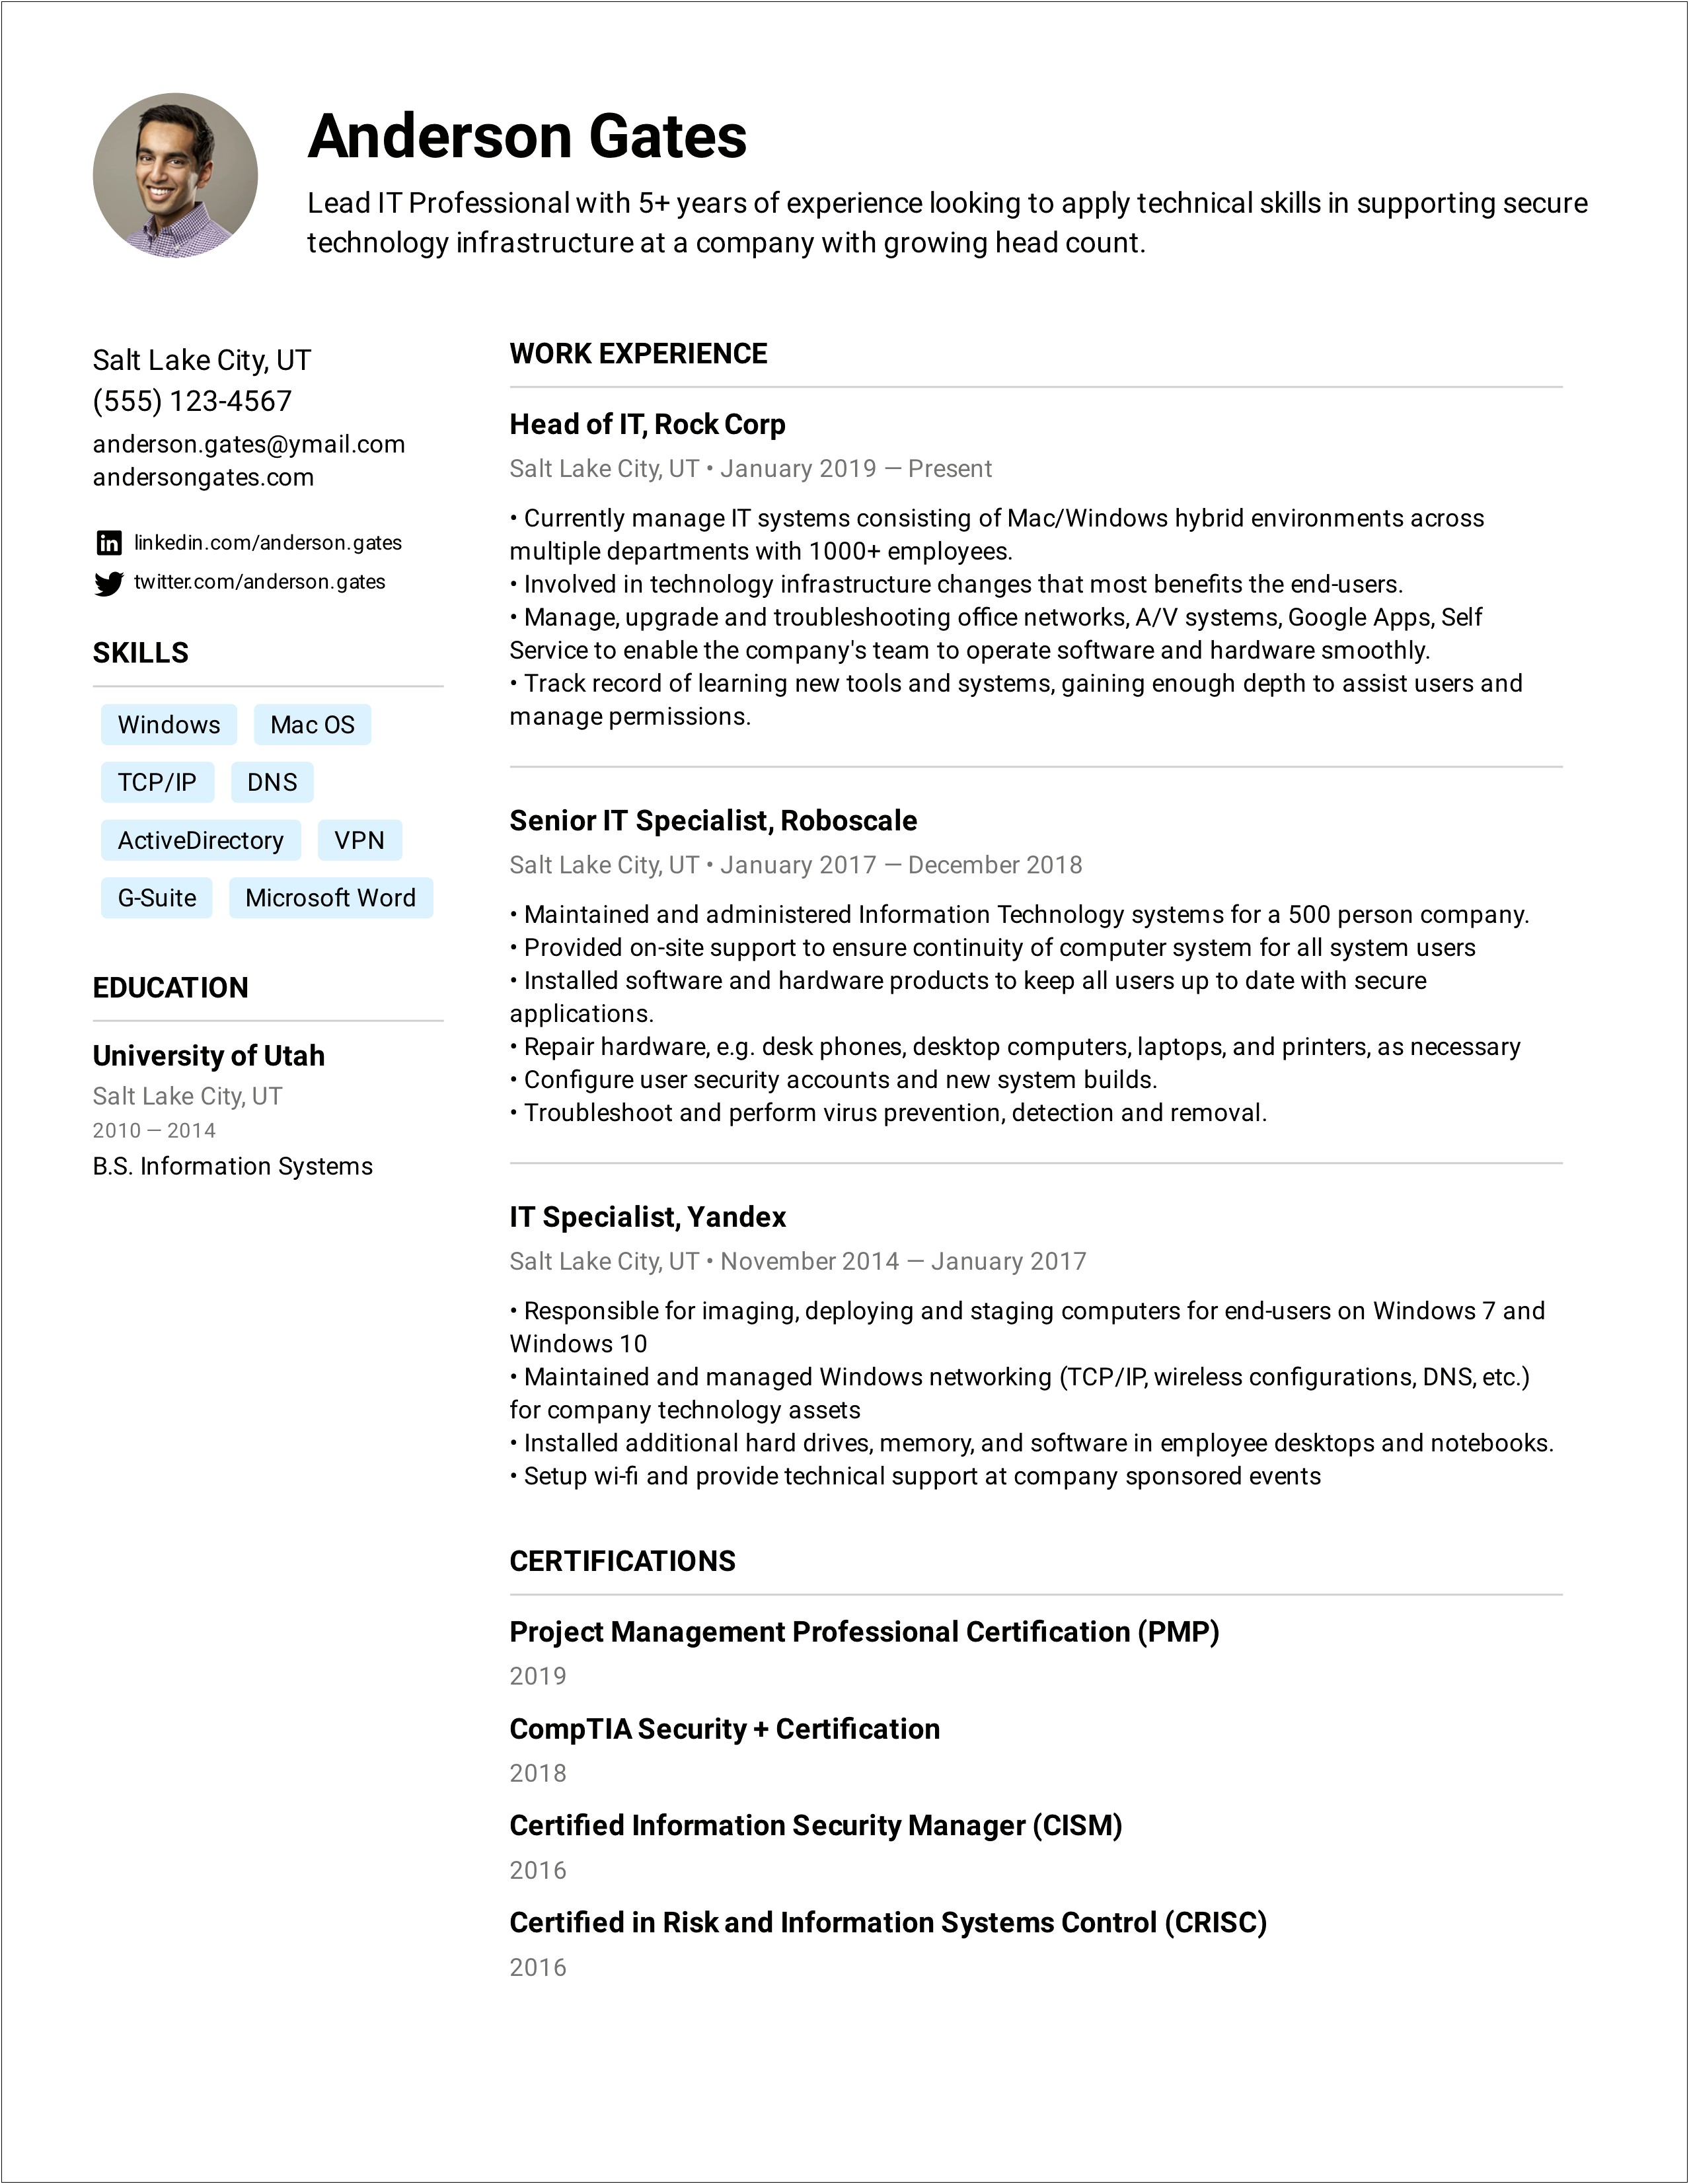 Sample Resume Summary For A Lead Specialist Job